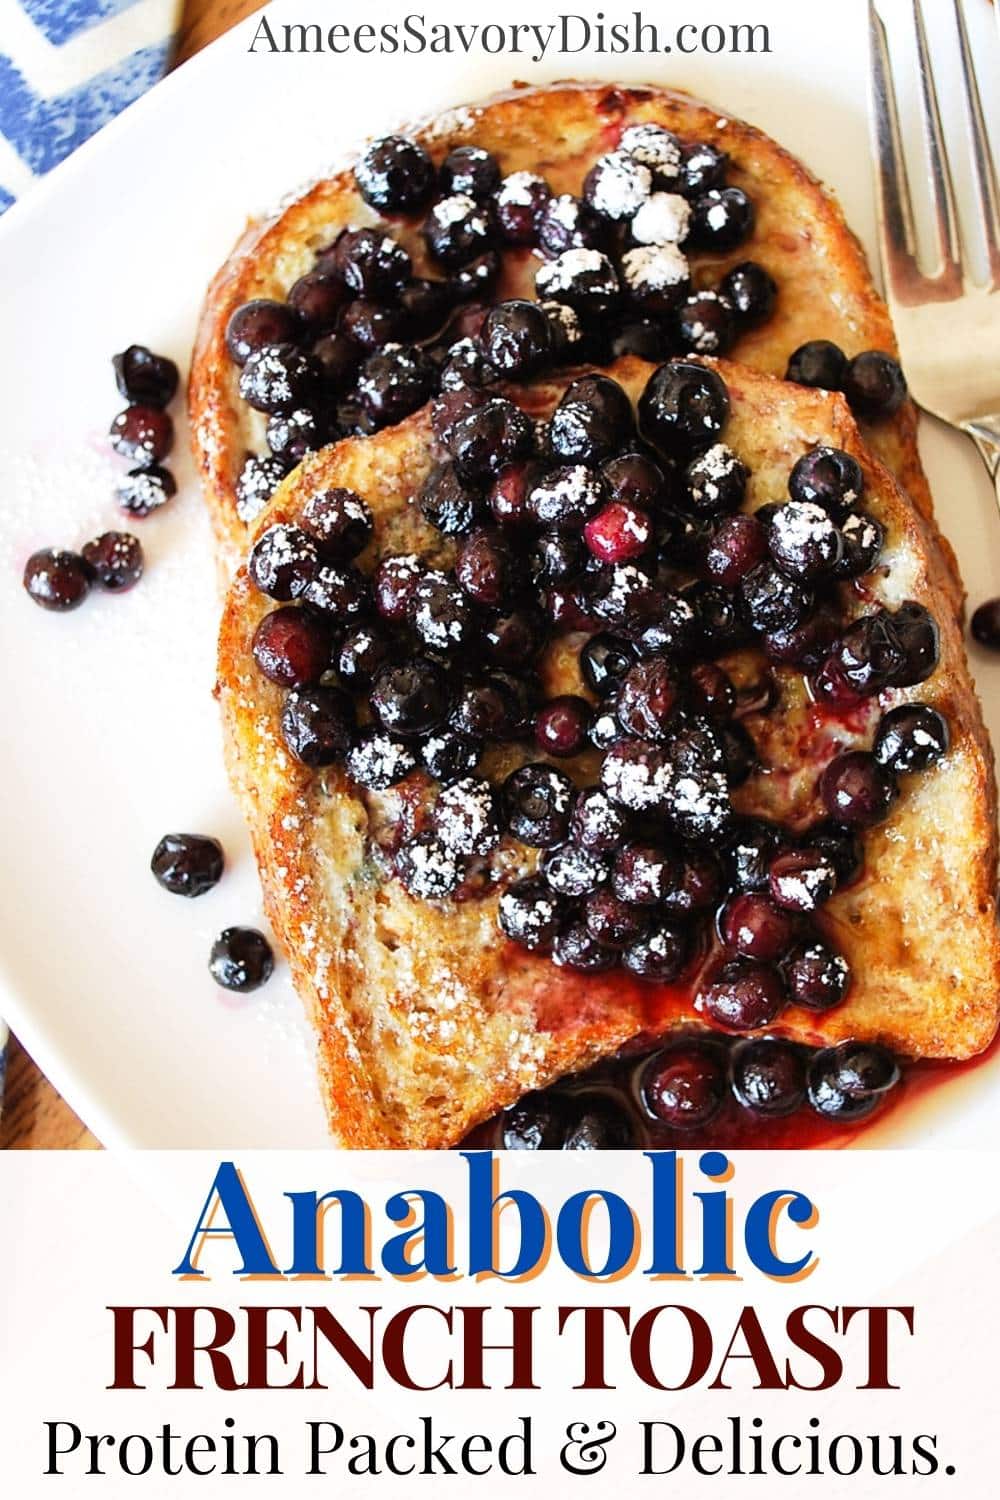 A nutritious and easy recipe for high protein Anabolic French Toast for the perfect muscle-building breakfast. via @Ameessavorydish